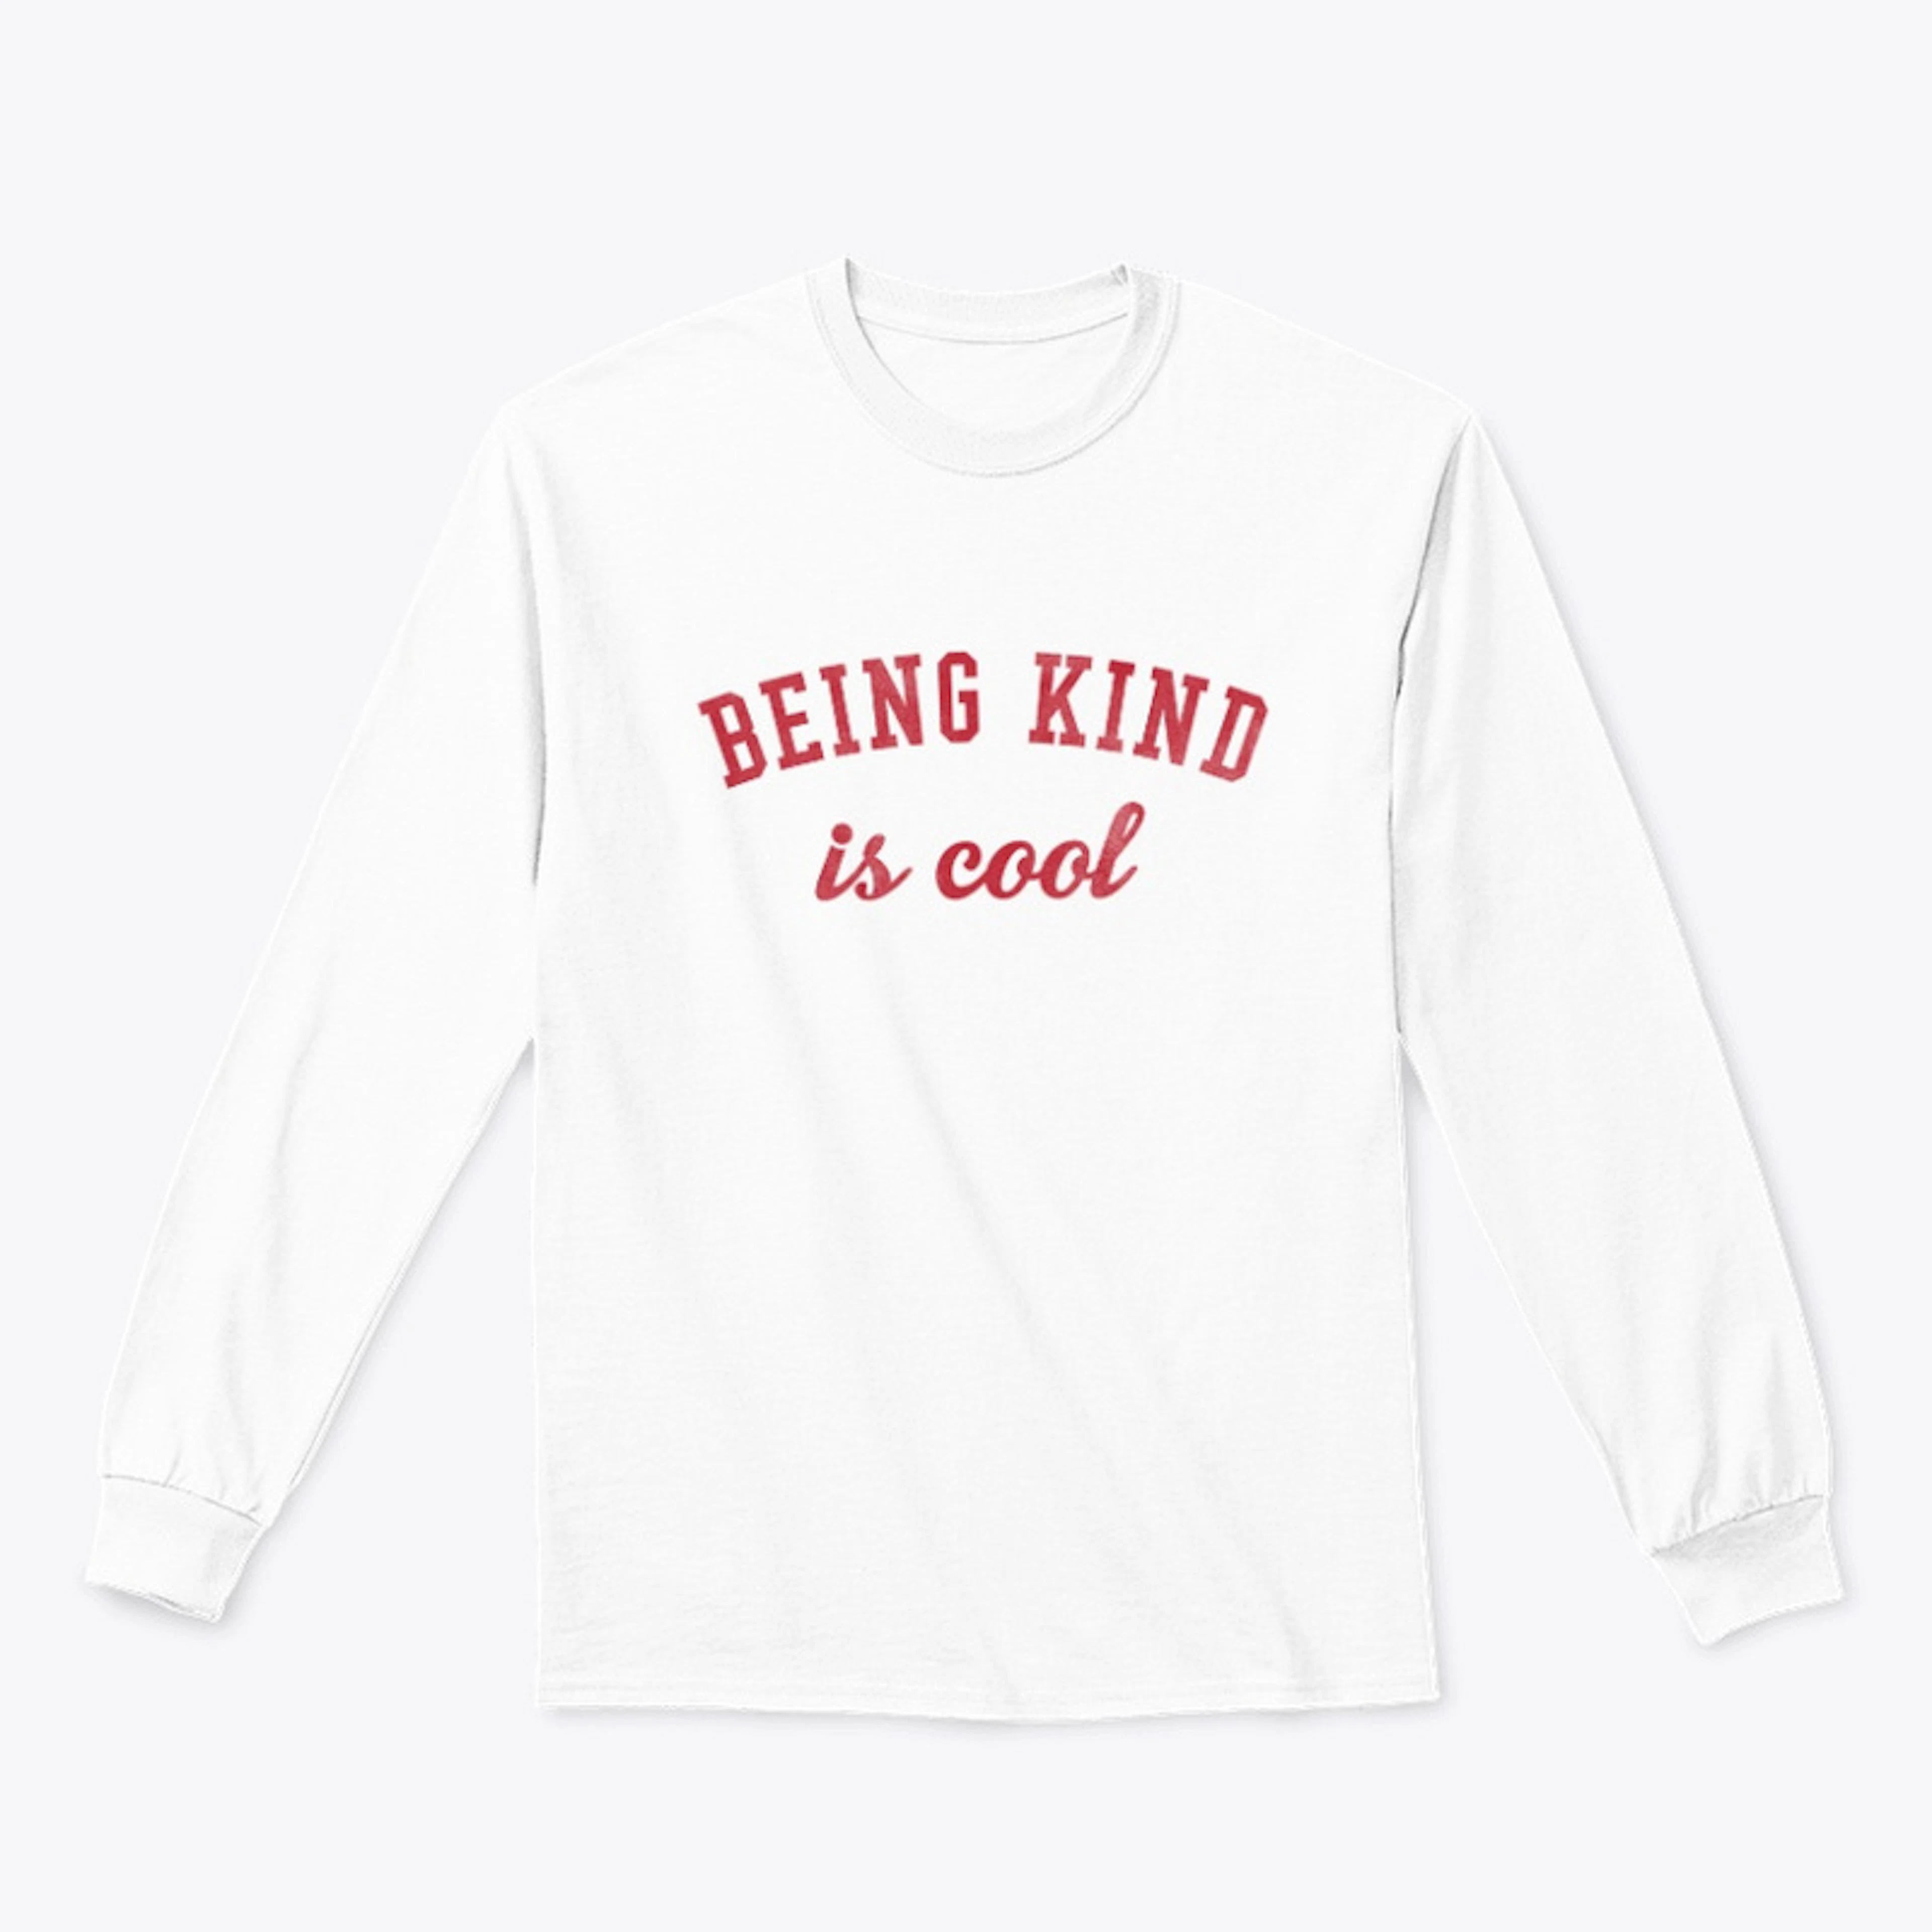 Being Kind is Cool